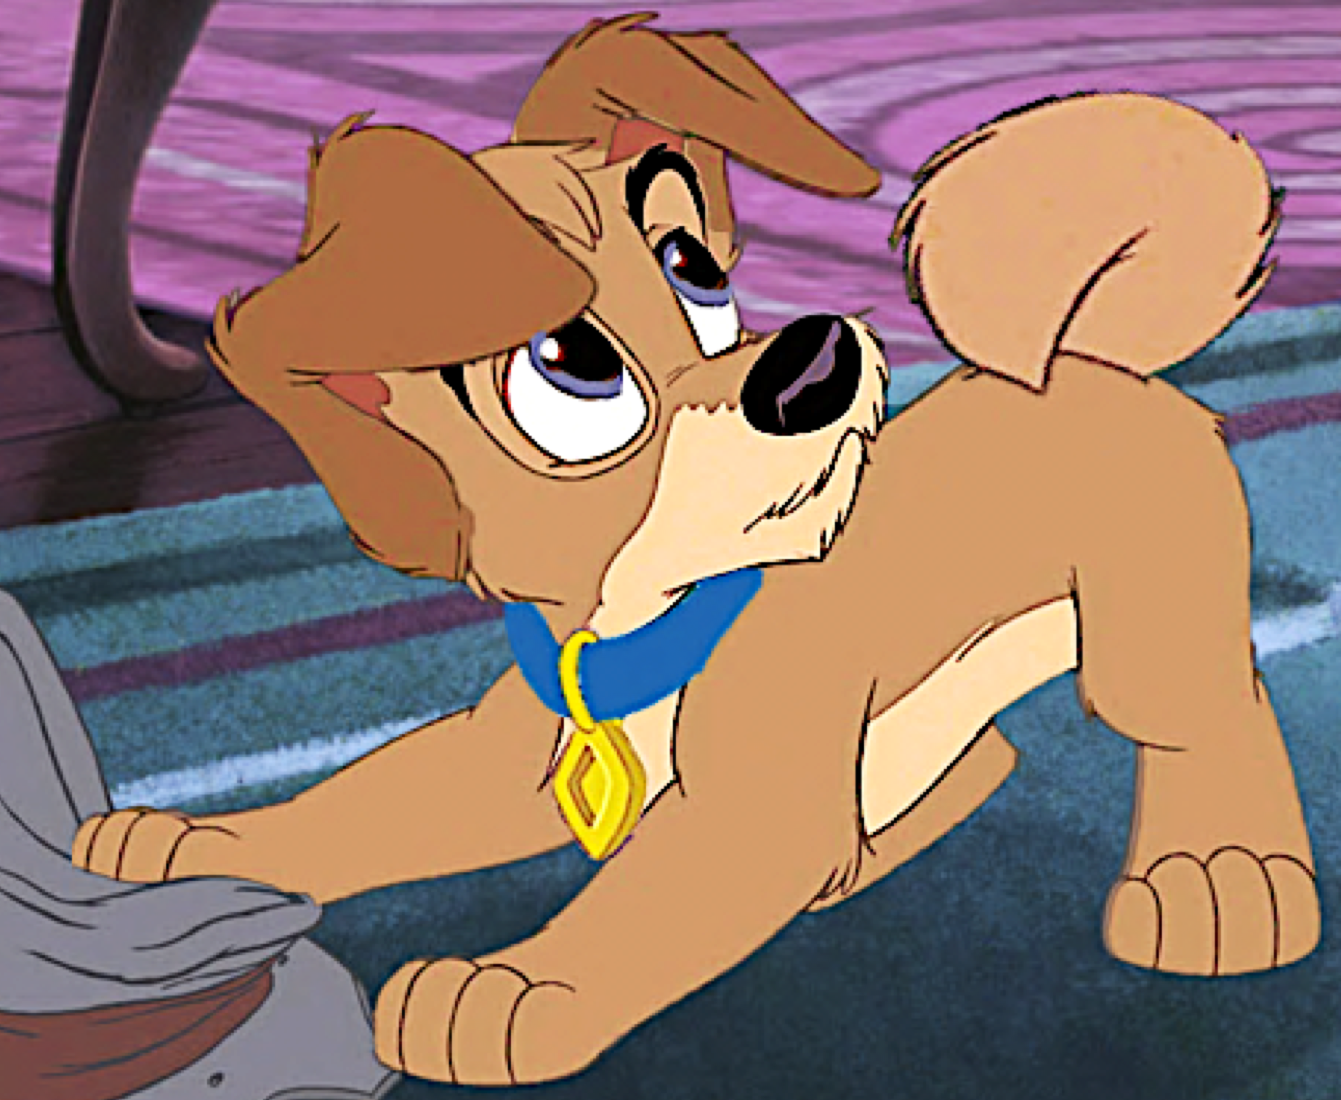 Lady and the Tramp II Images on Fanpop.